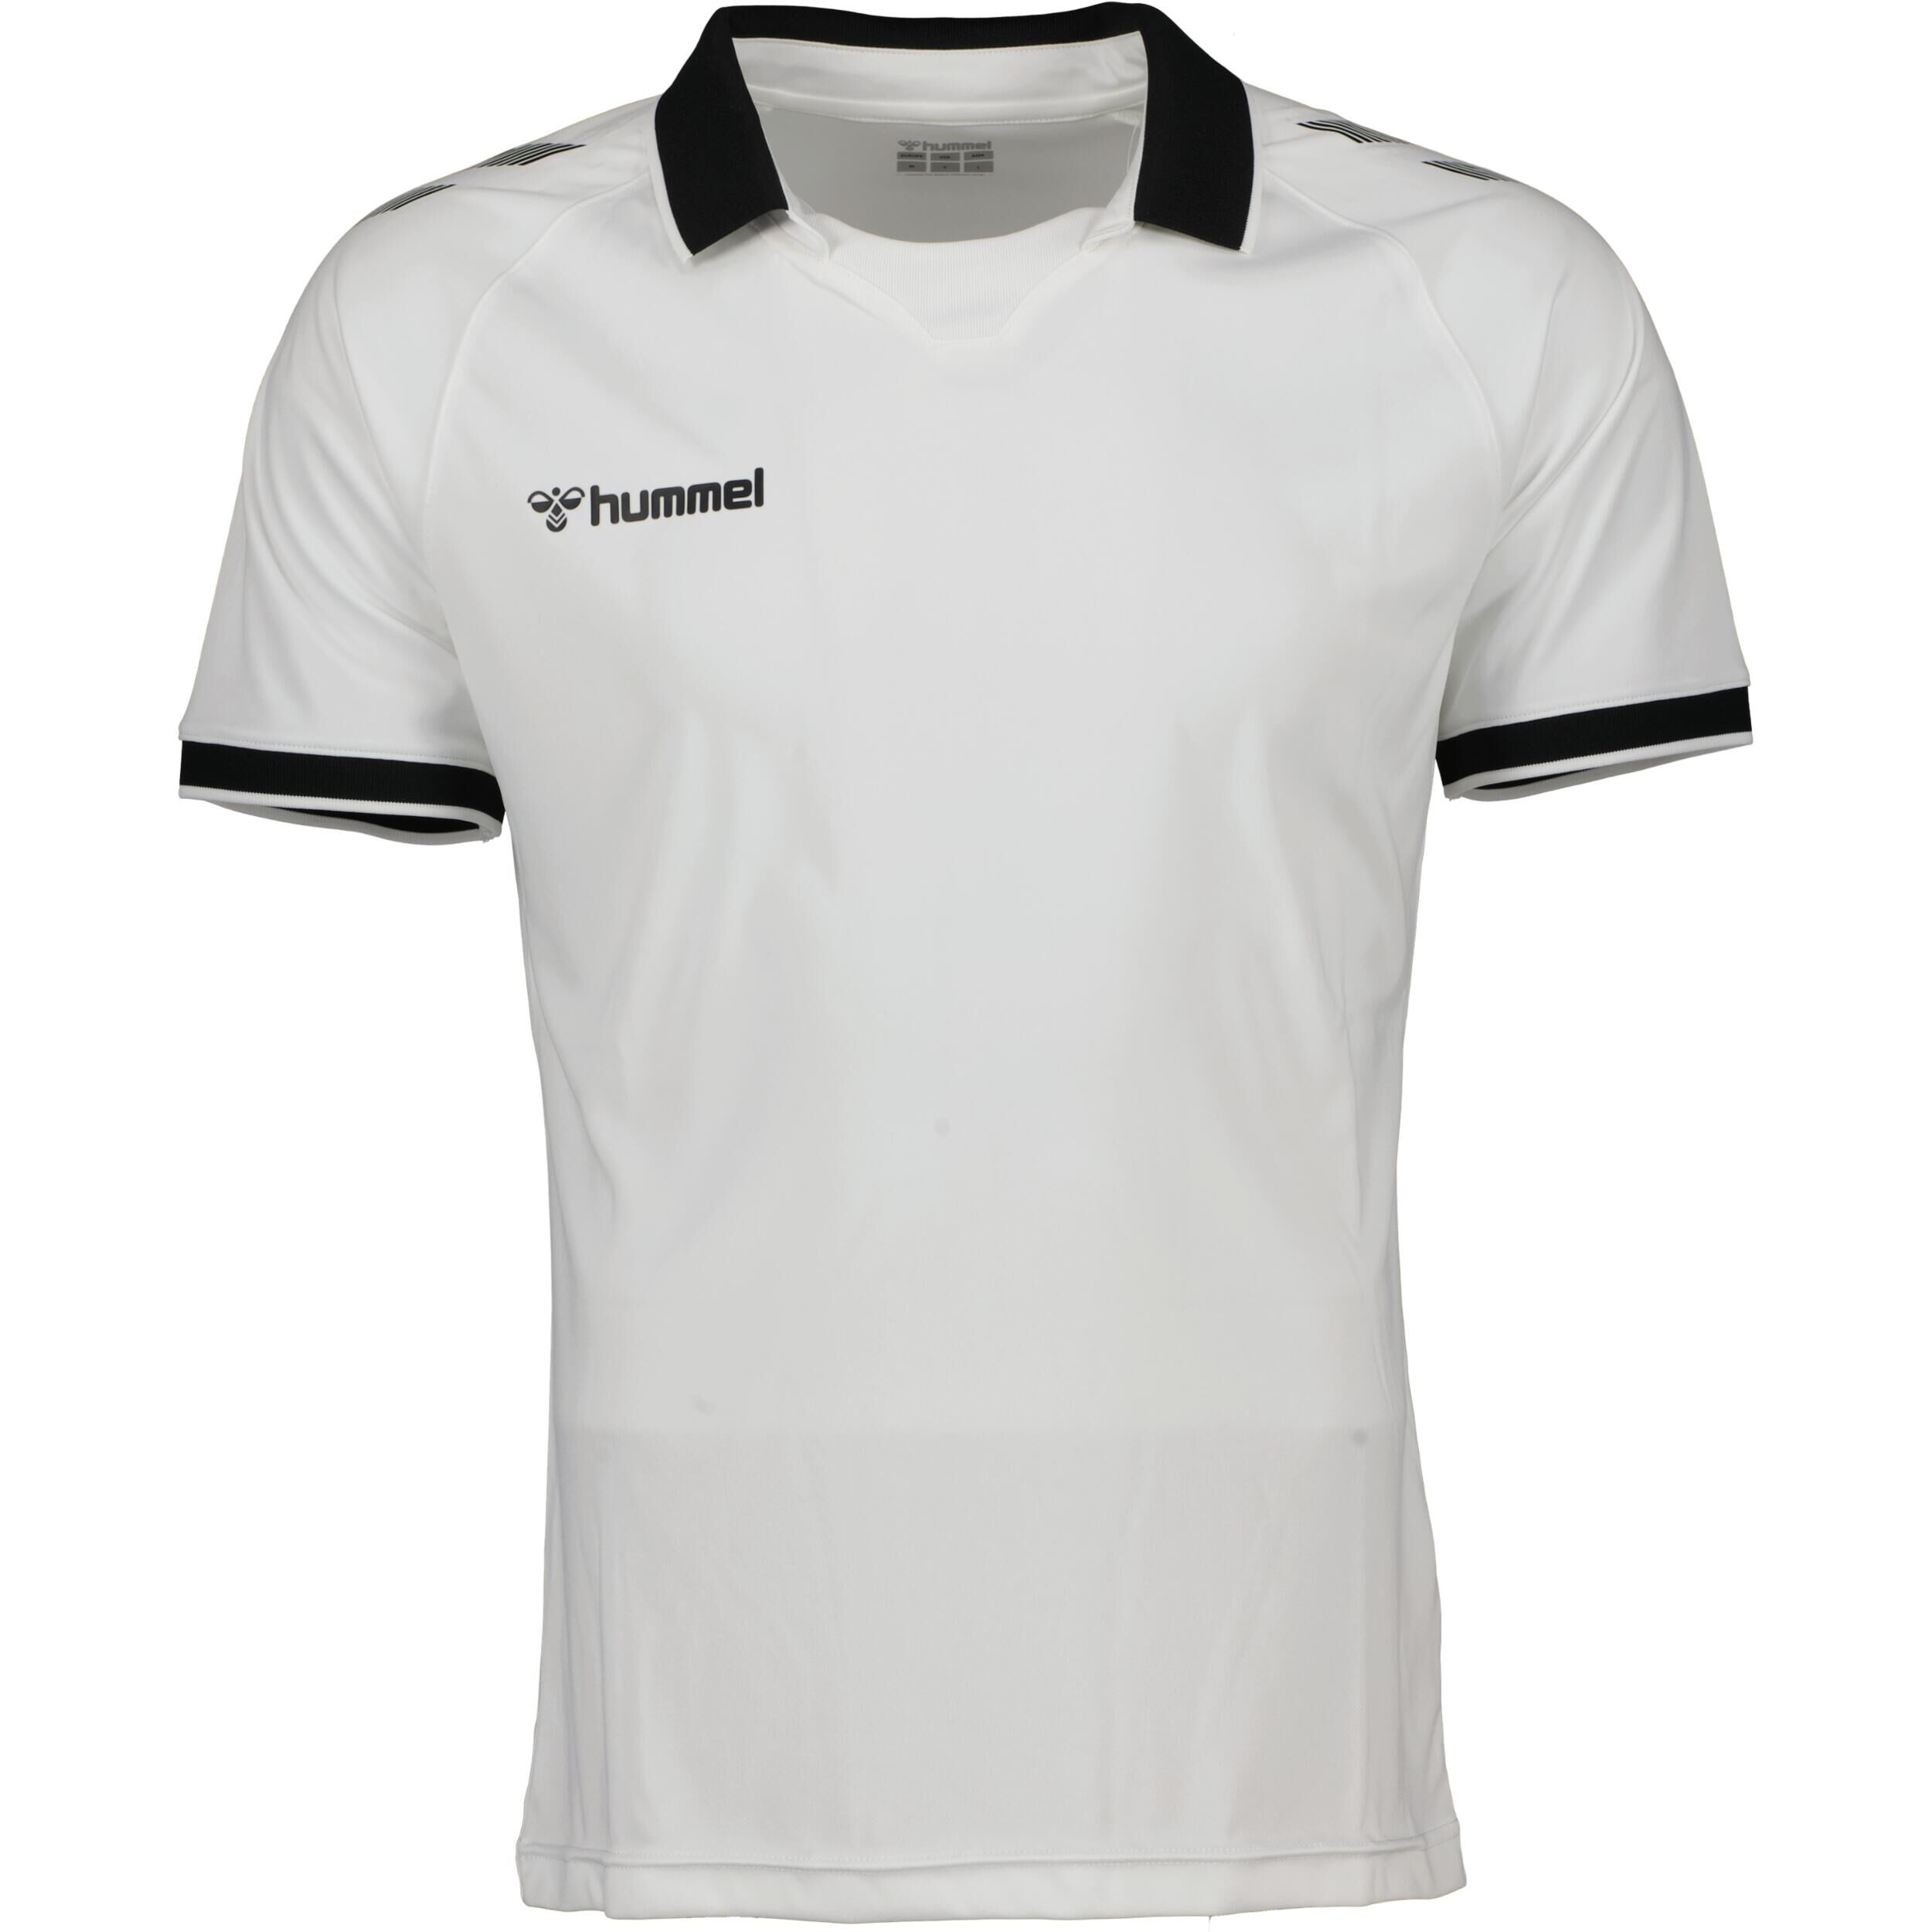 HUMMEL Impact jersey for men, great for football, in white/black